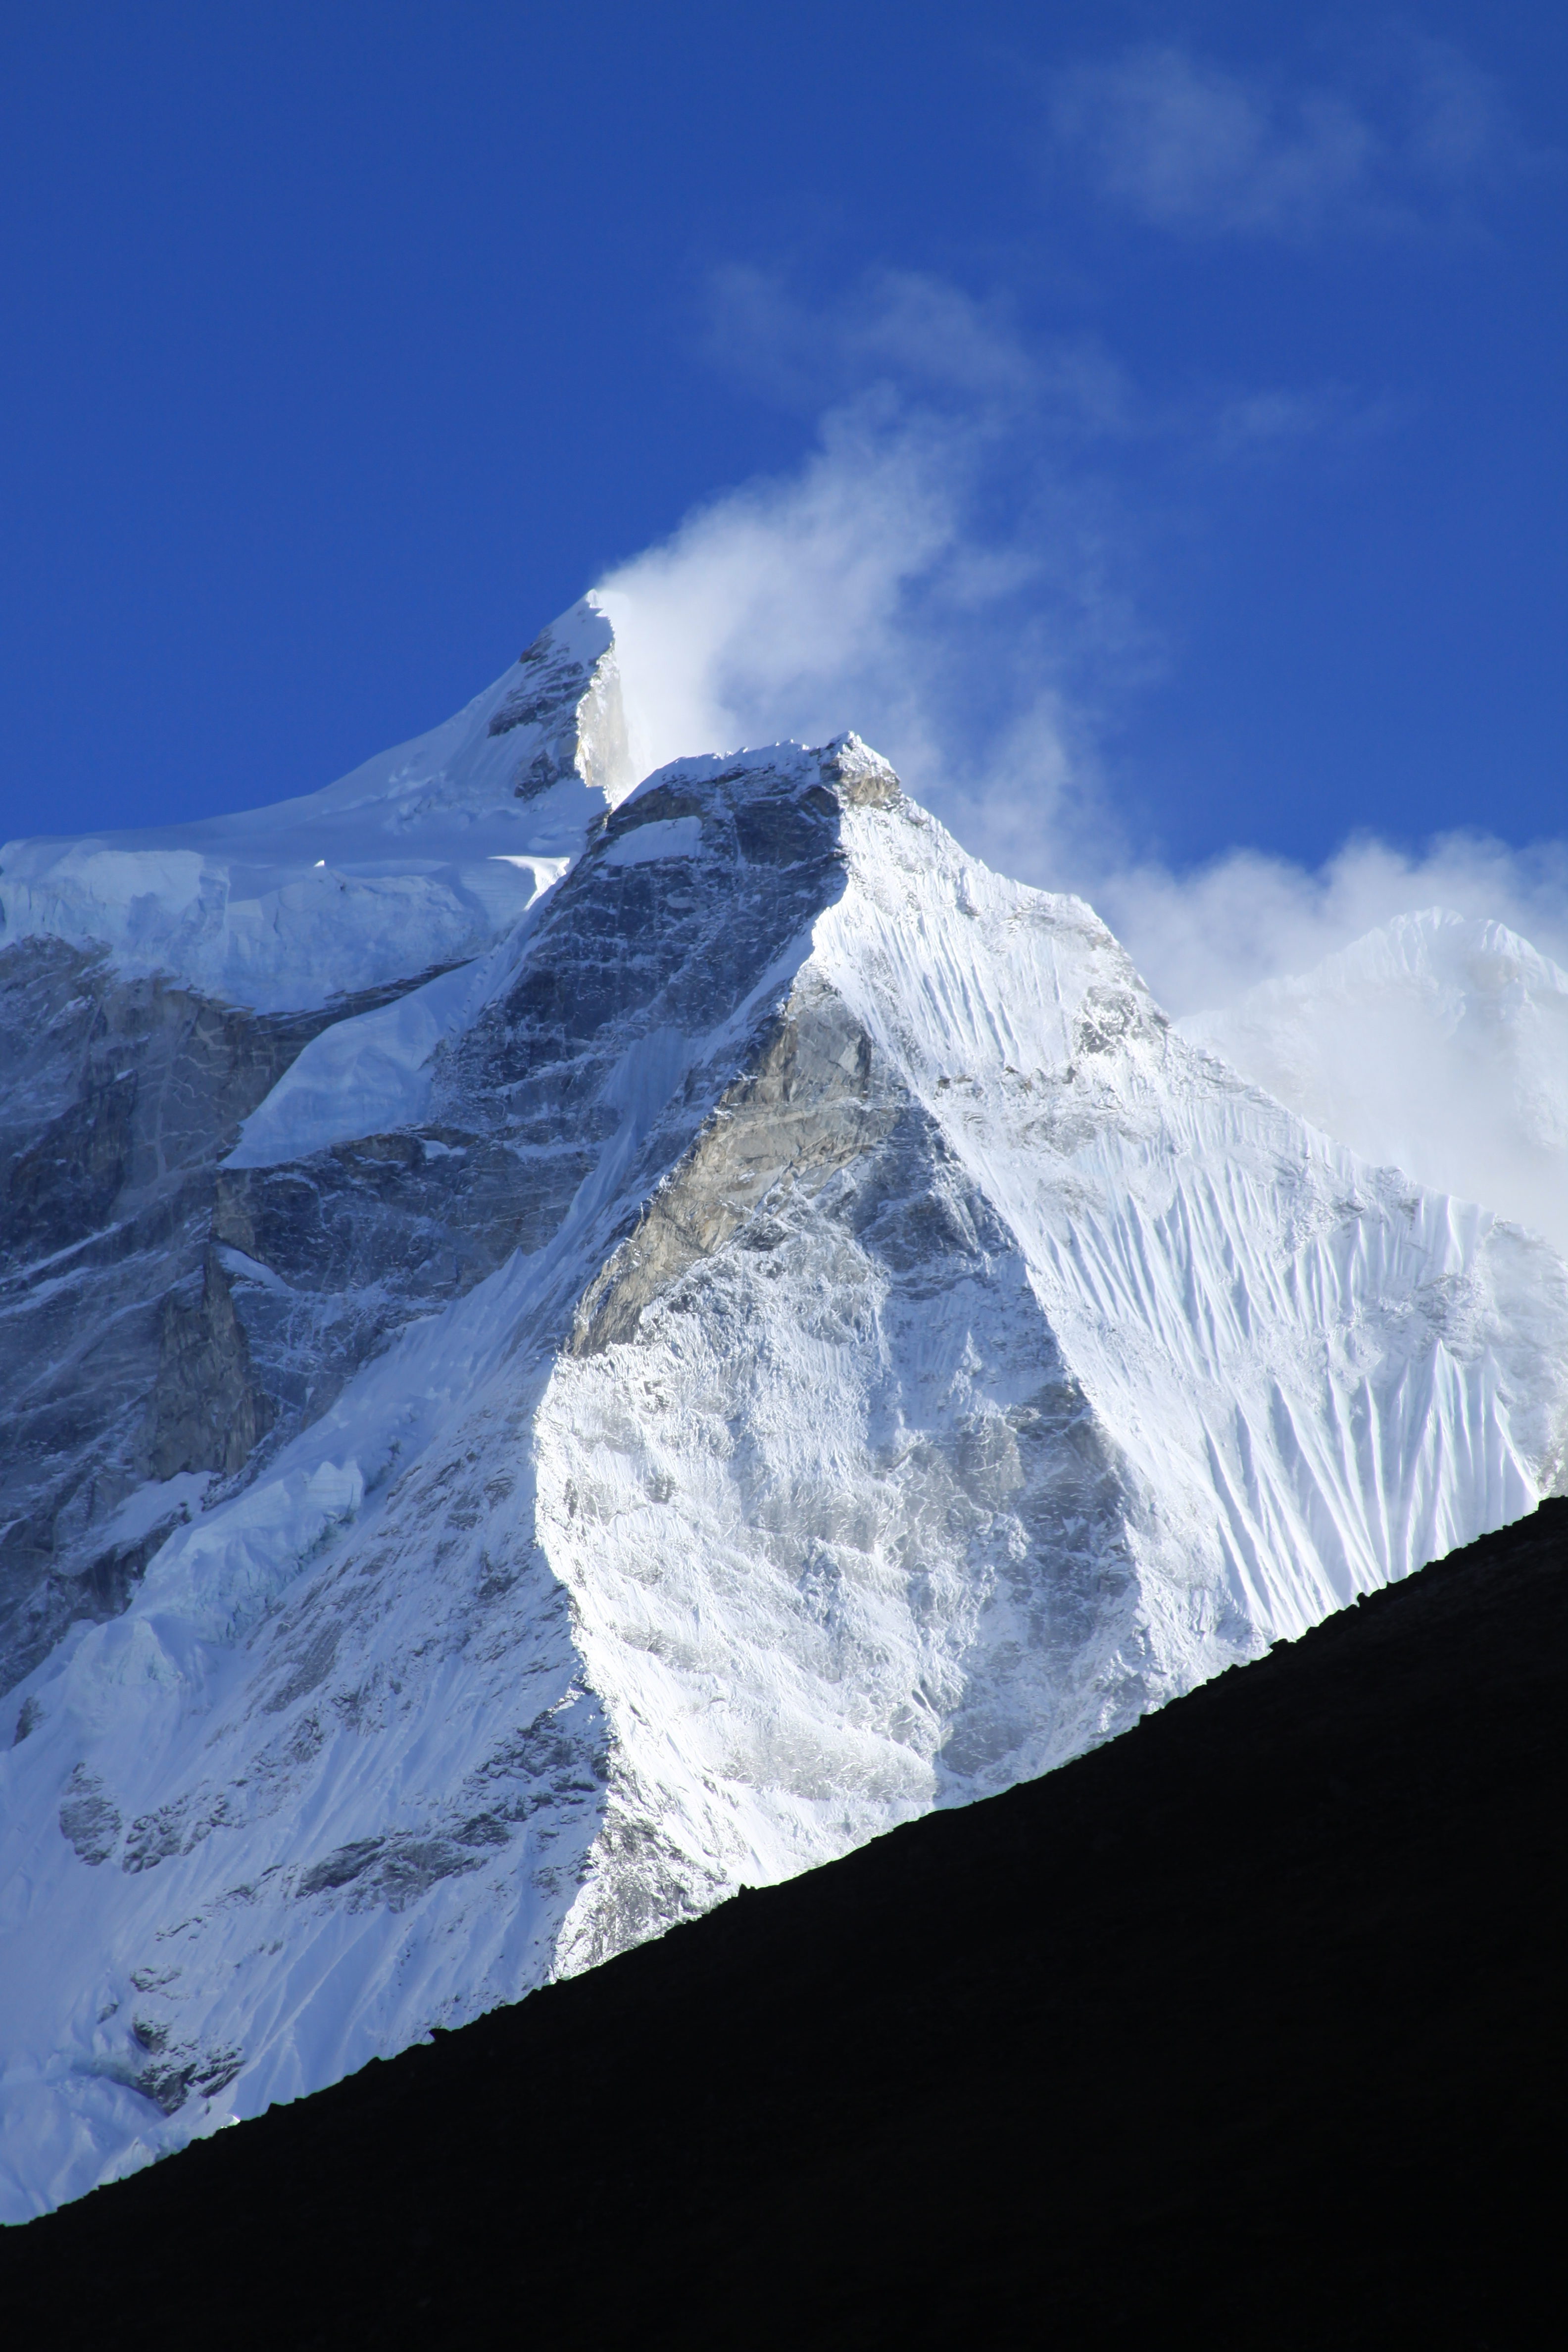 Just another crazy mountain in the Himalayas 